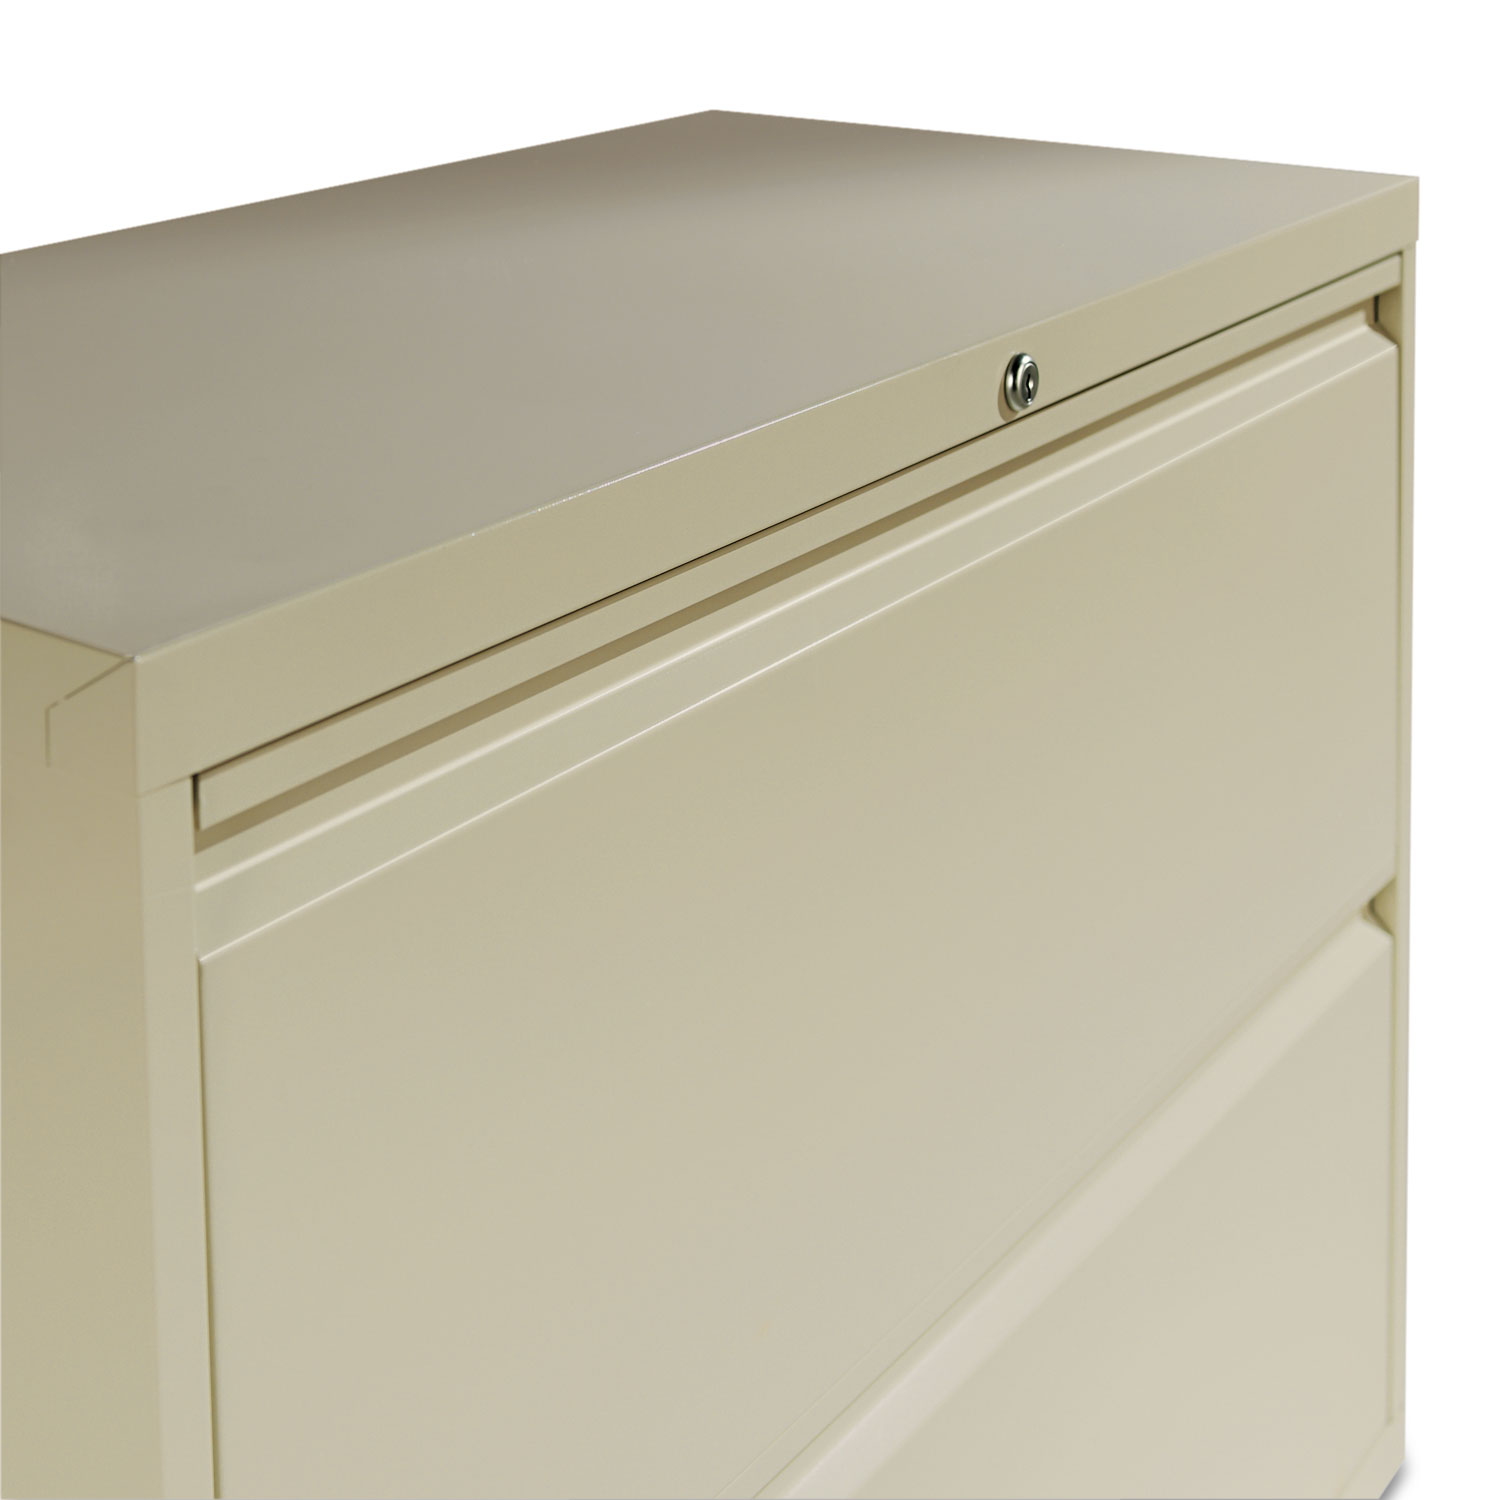 Four-Drawer Lateral File Cabinet, 30w x 18d x 52 1/2h, Putty